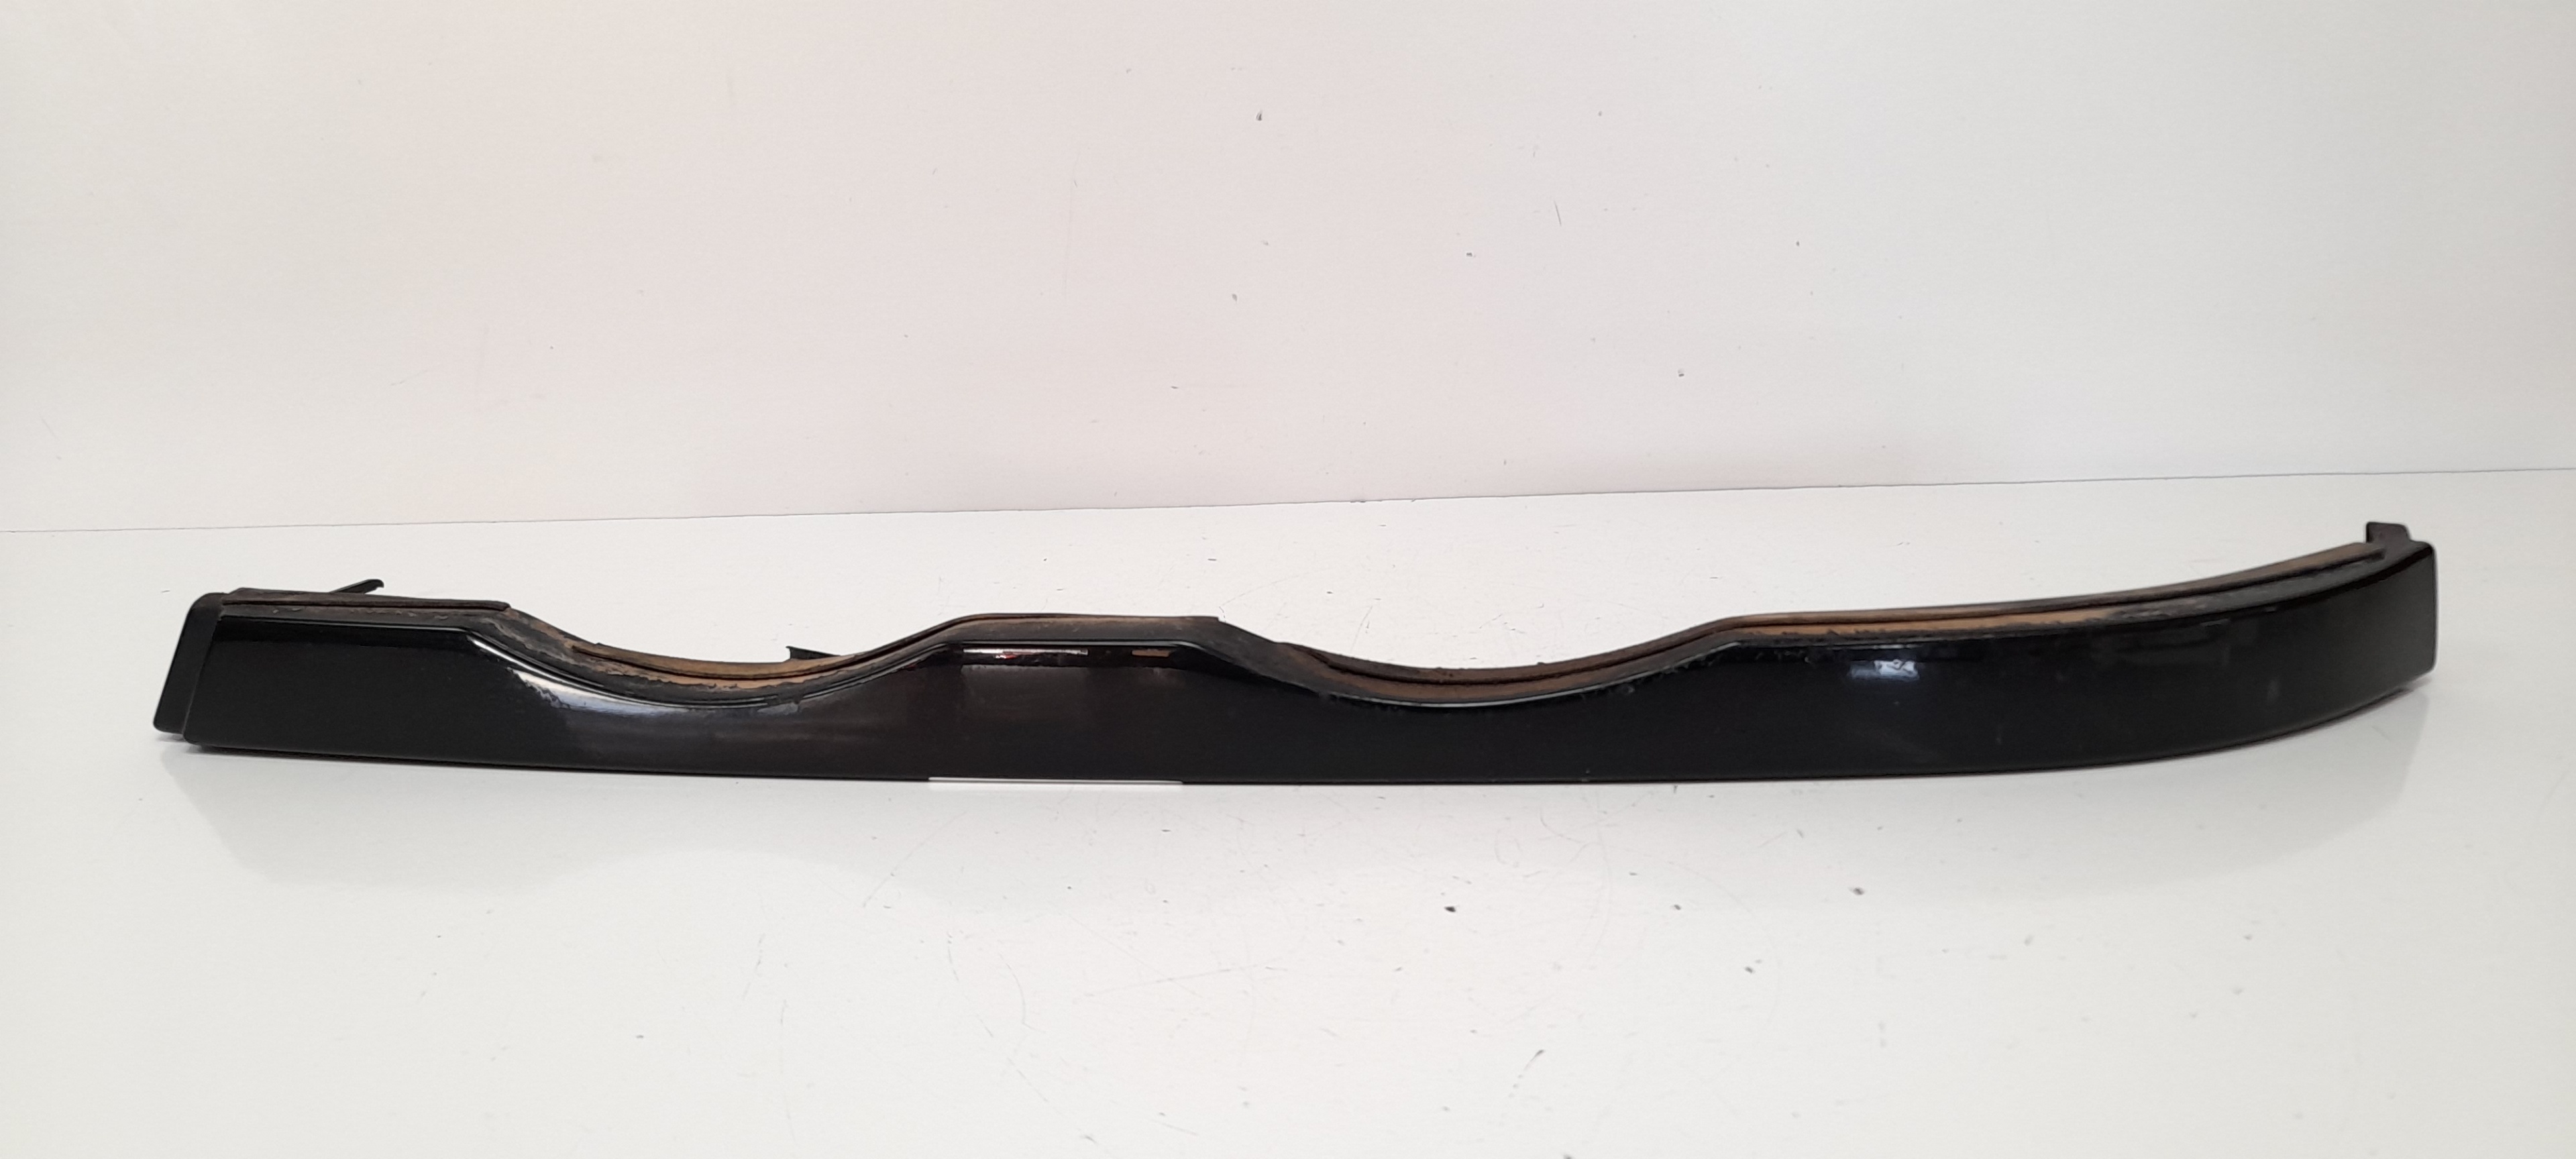 VAUXHALL 3 Series E46 (1997-2006) Other Trim Parts 51138208481 22011015